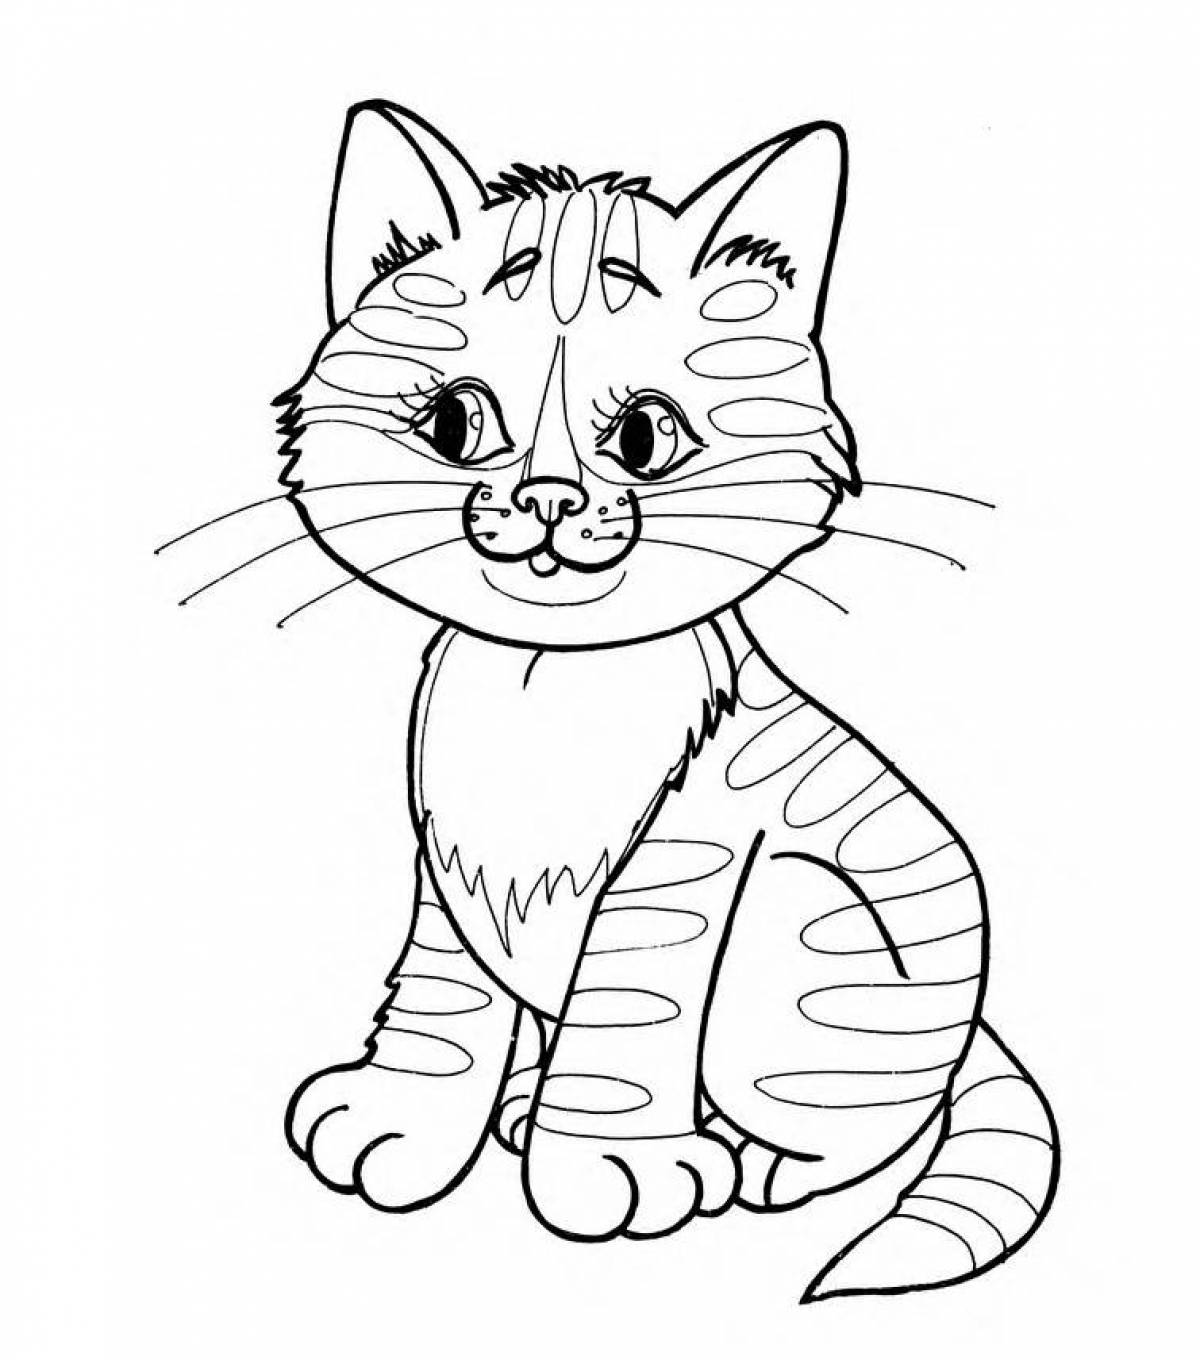 Irresistible pet coloring pages for 3-4 year olds